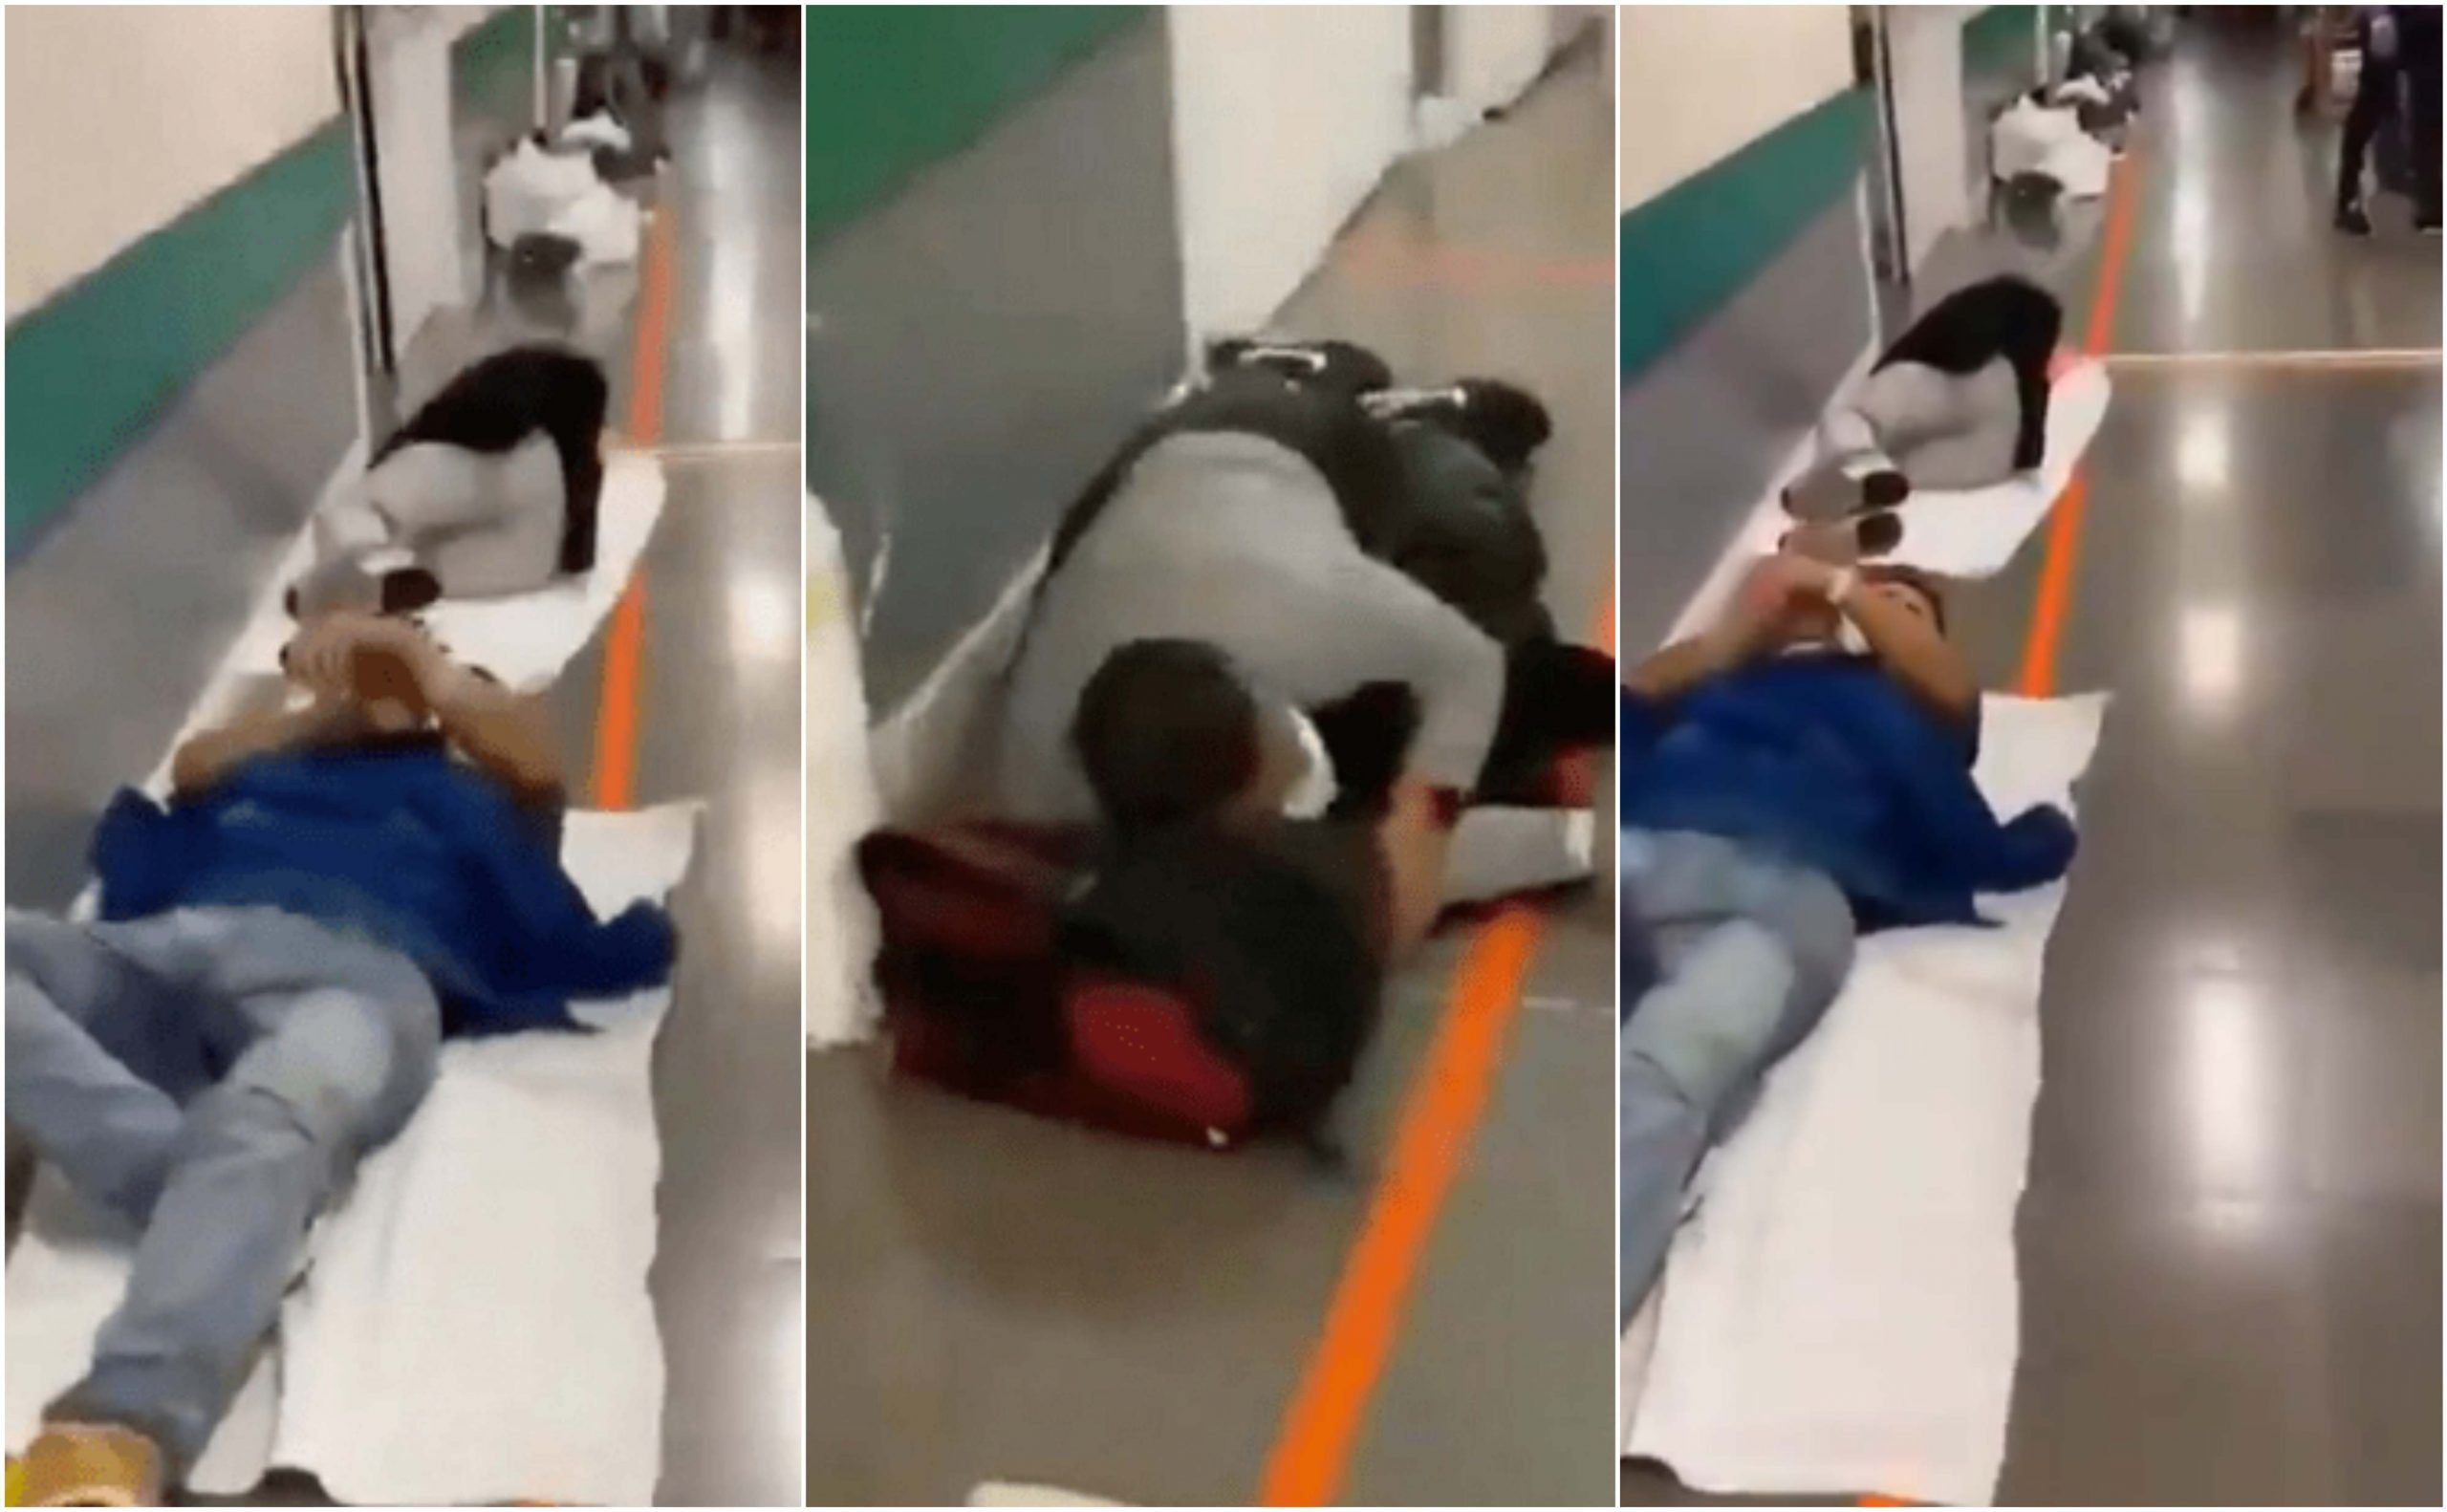 Sad video of coronavirus patients coughing and lying on the floor at the hospital emerges.